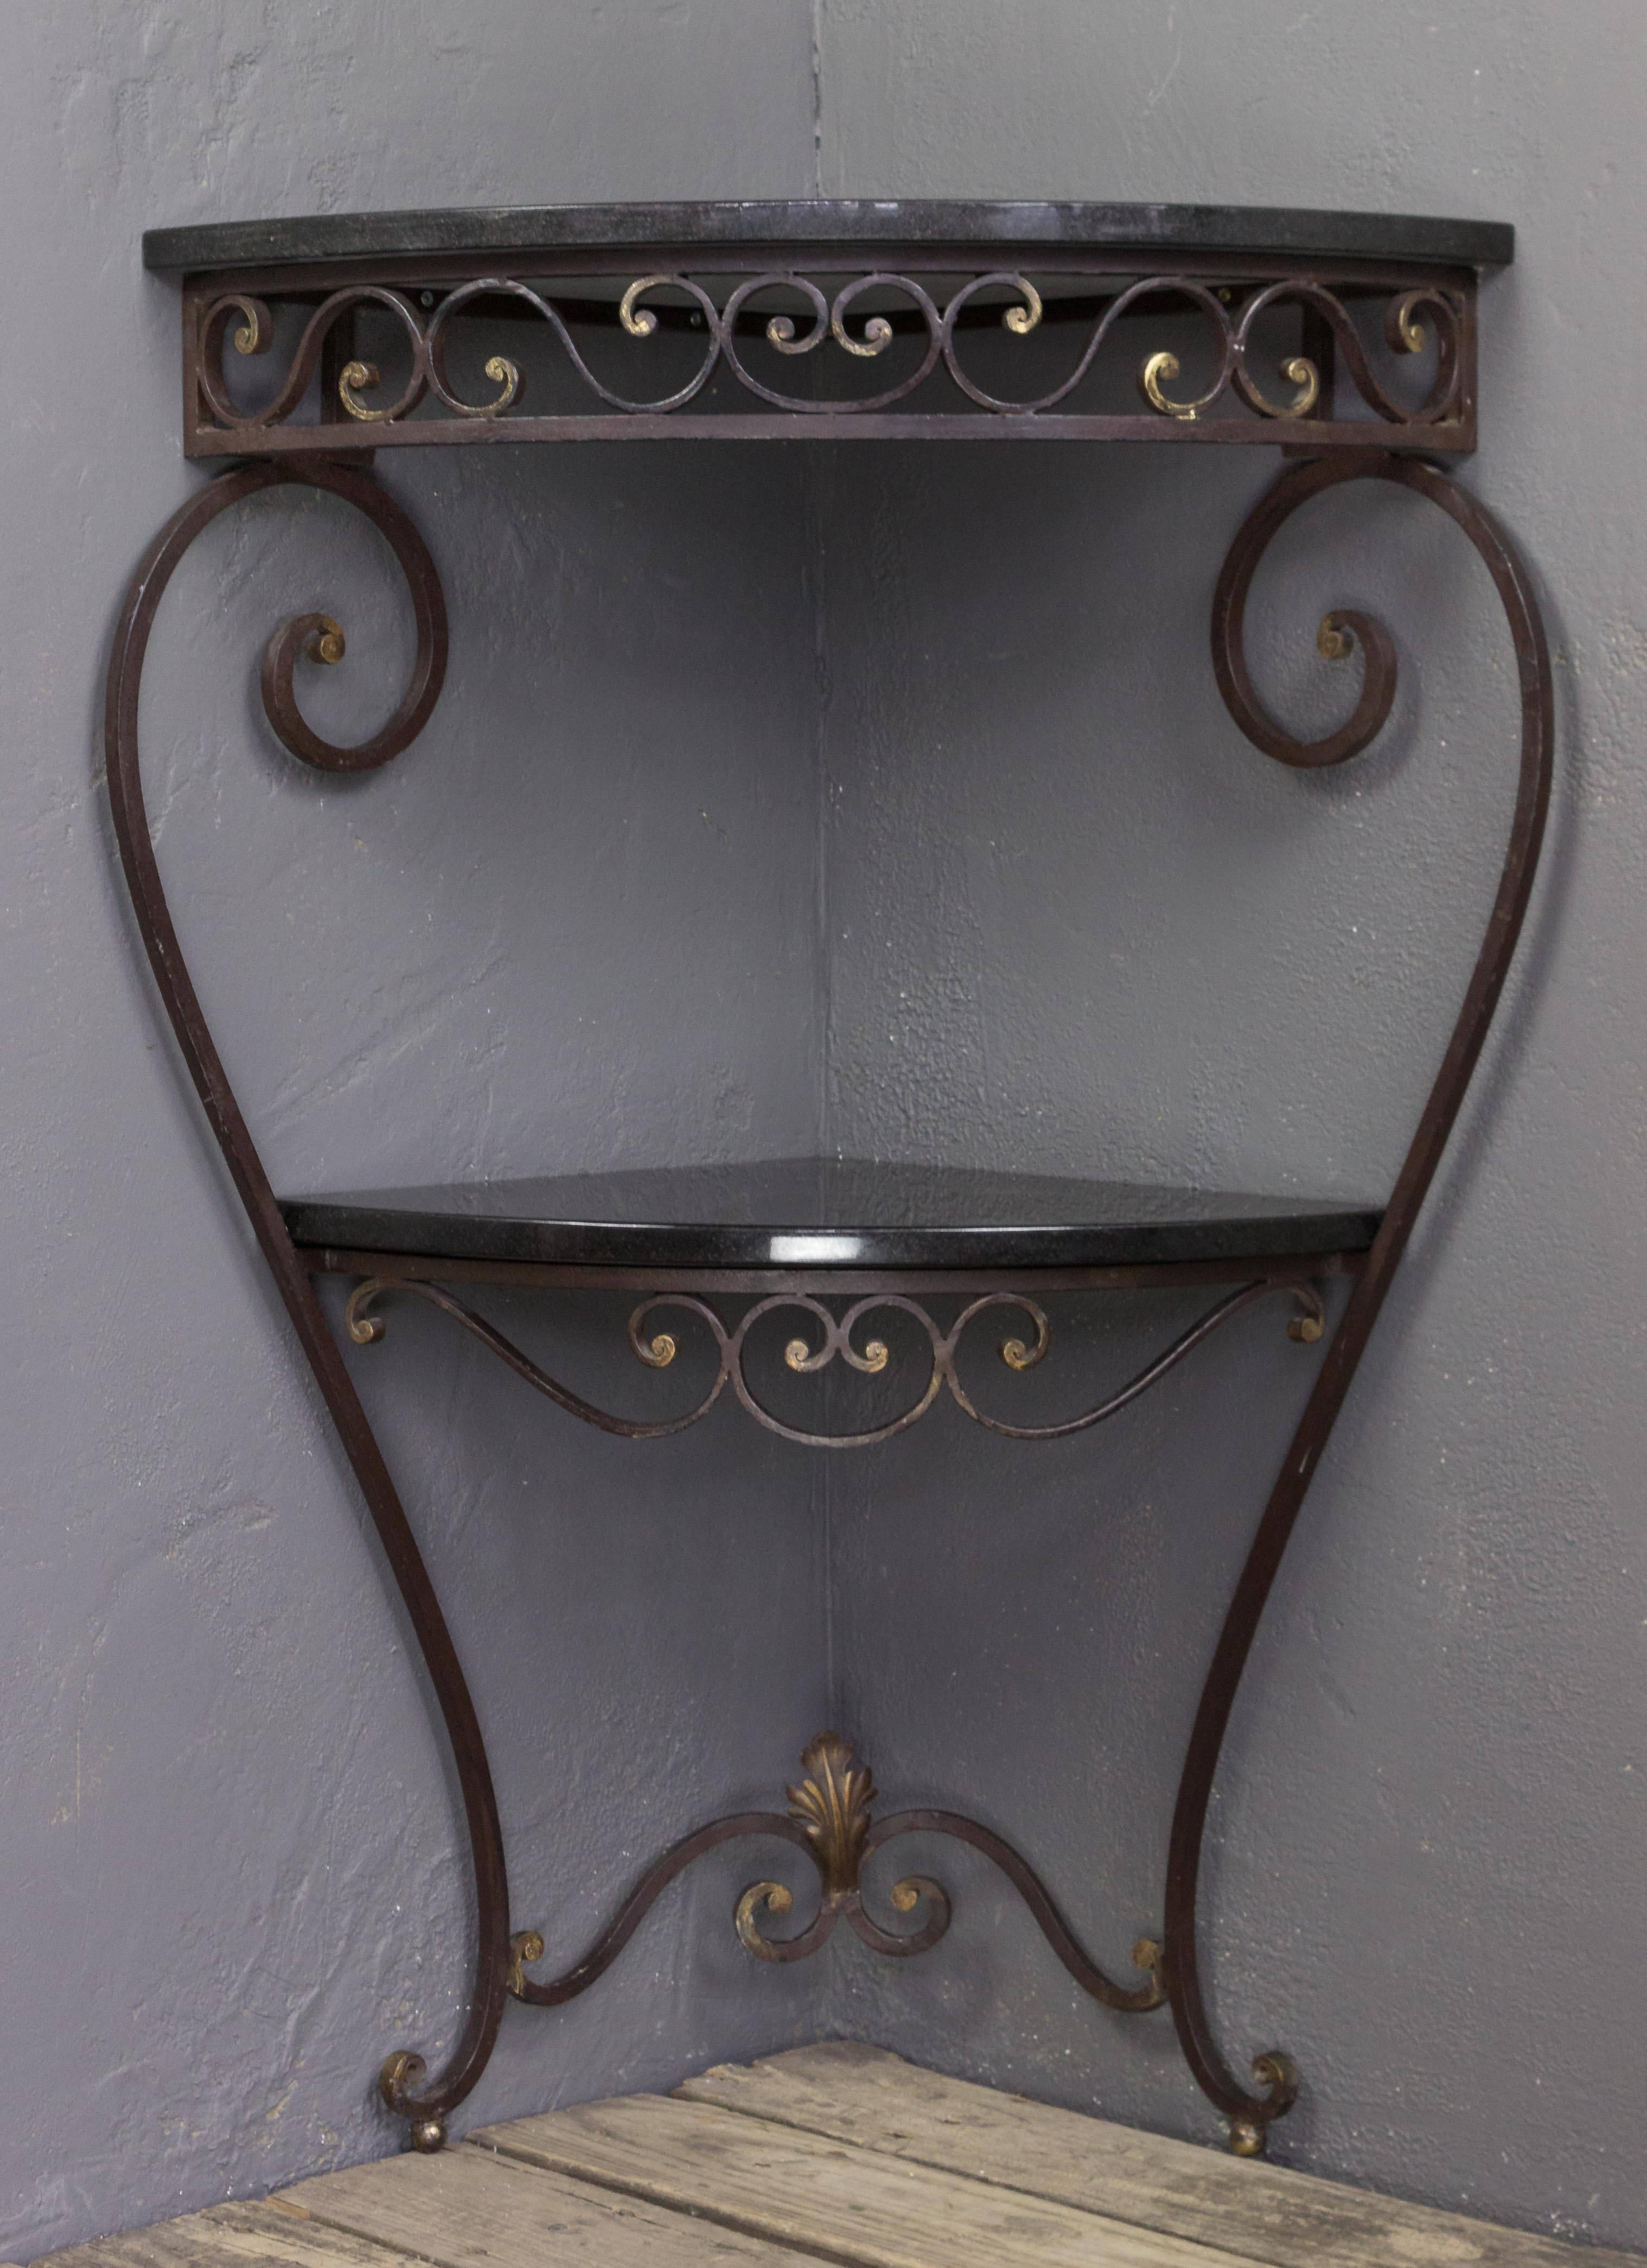 A handsome French 1940s wrought iron corner console with polished granite and traces of gilt to the frame. The console is in very good condition and the granite stone shelves are new. We think this unusual piece is perfect for that corner that needs